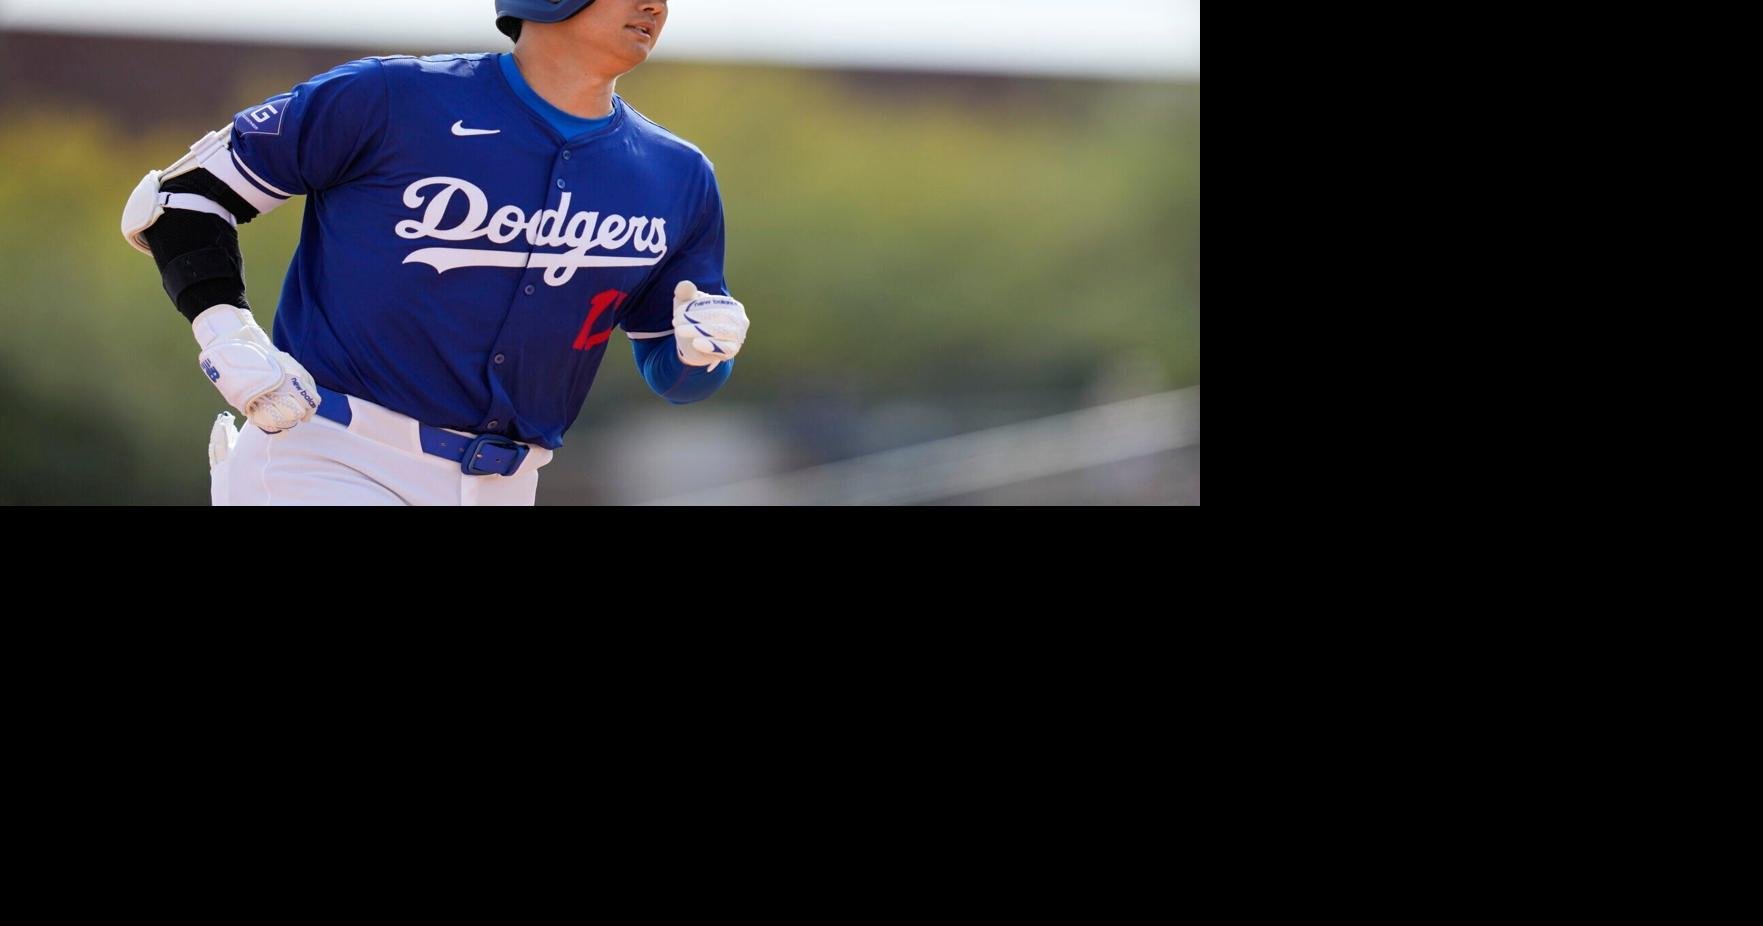 Dodgers vs. Padres odds, preview & picks for MLB Seoul Series Opening